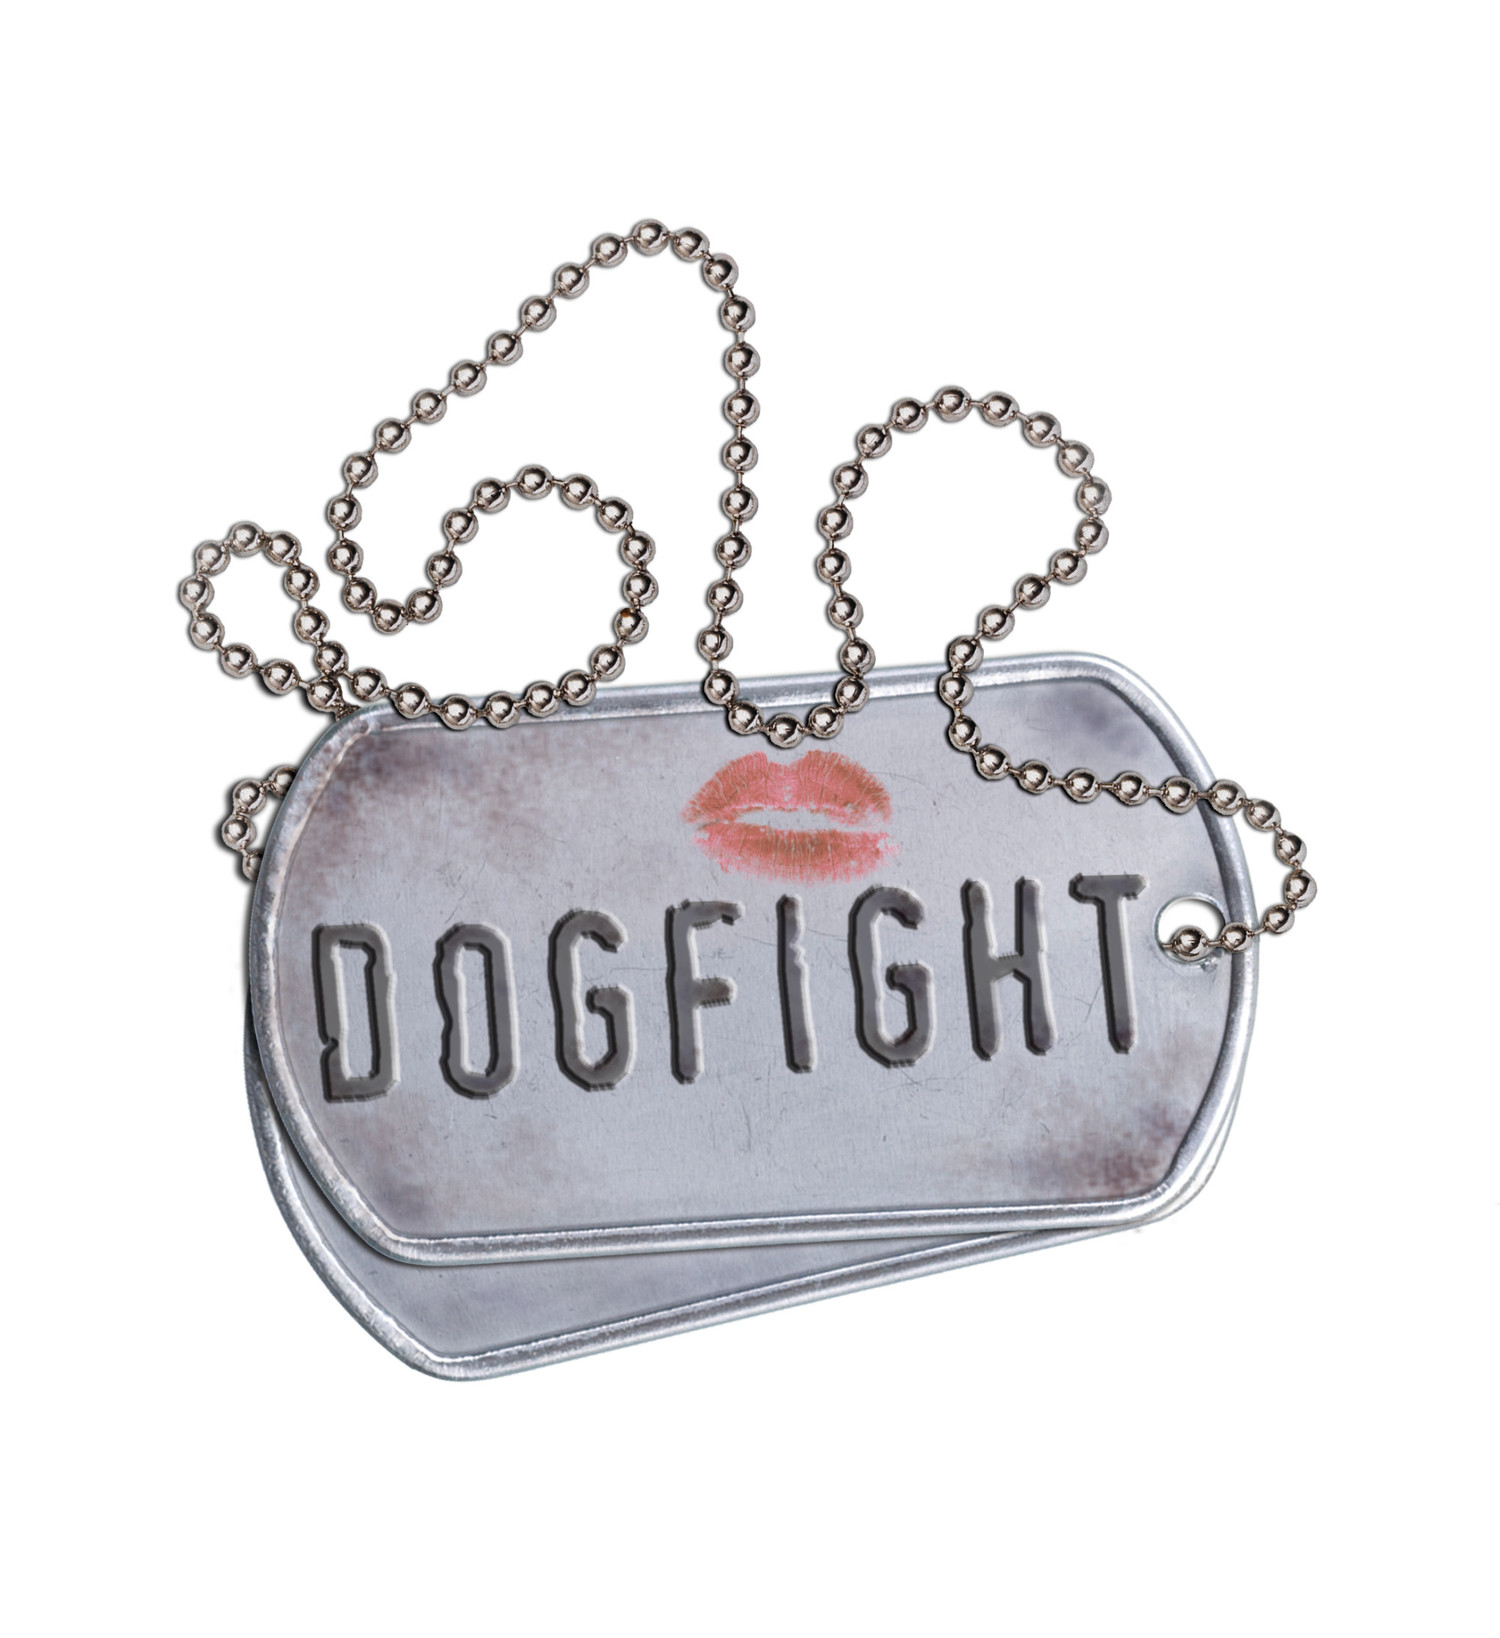 Scandinavian Premiere Of DOGFIGHT Will Open in August 